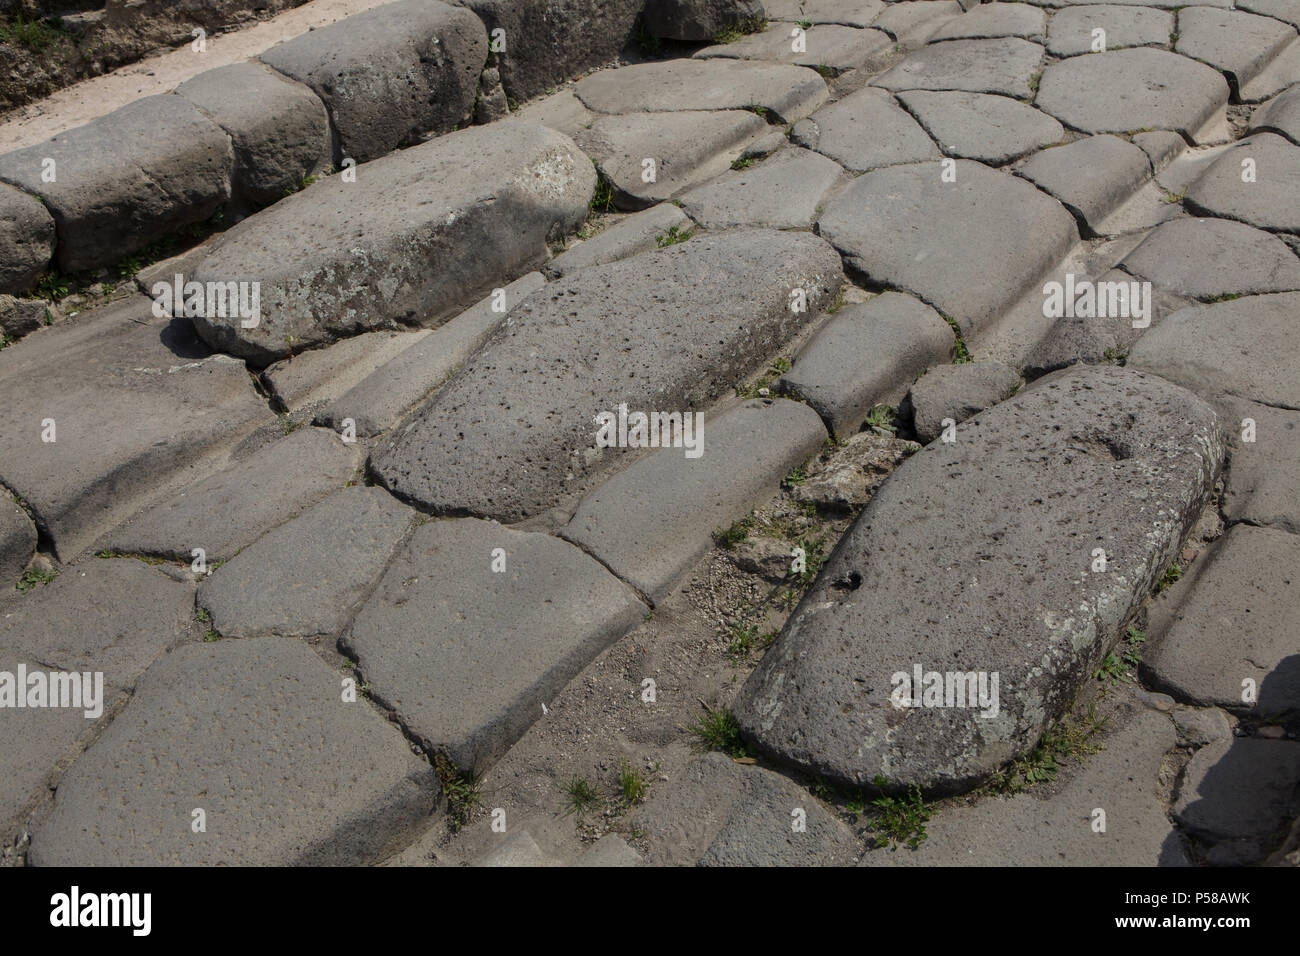 Traditional pedestrian crossing with gaps for chariots on the cobbled street in the archaeological site of Pompeii (Pompei) near Naples, Campania, Italy. Stock Photo